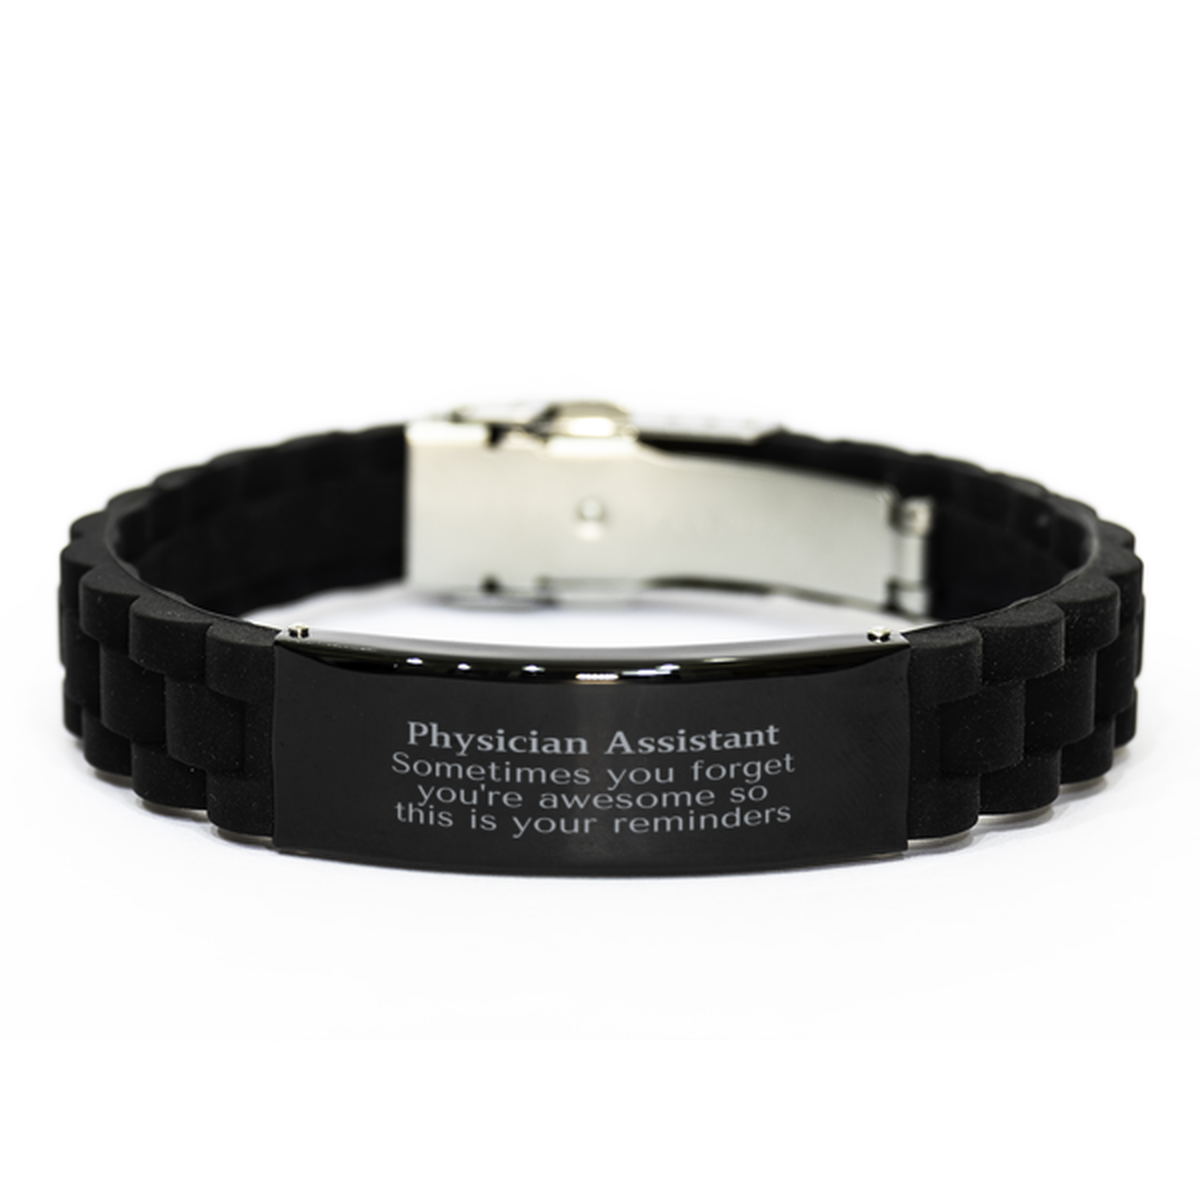 Sentimental Physician Assistant Black Glidelock Clasp Bracelet, Physician Assistant Sometimes you forget you're awesome so this is your reminders, Graduation Christmas Birthday Gifts for Physician Assistant, Men, Women, Coworkers